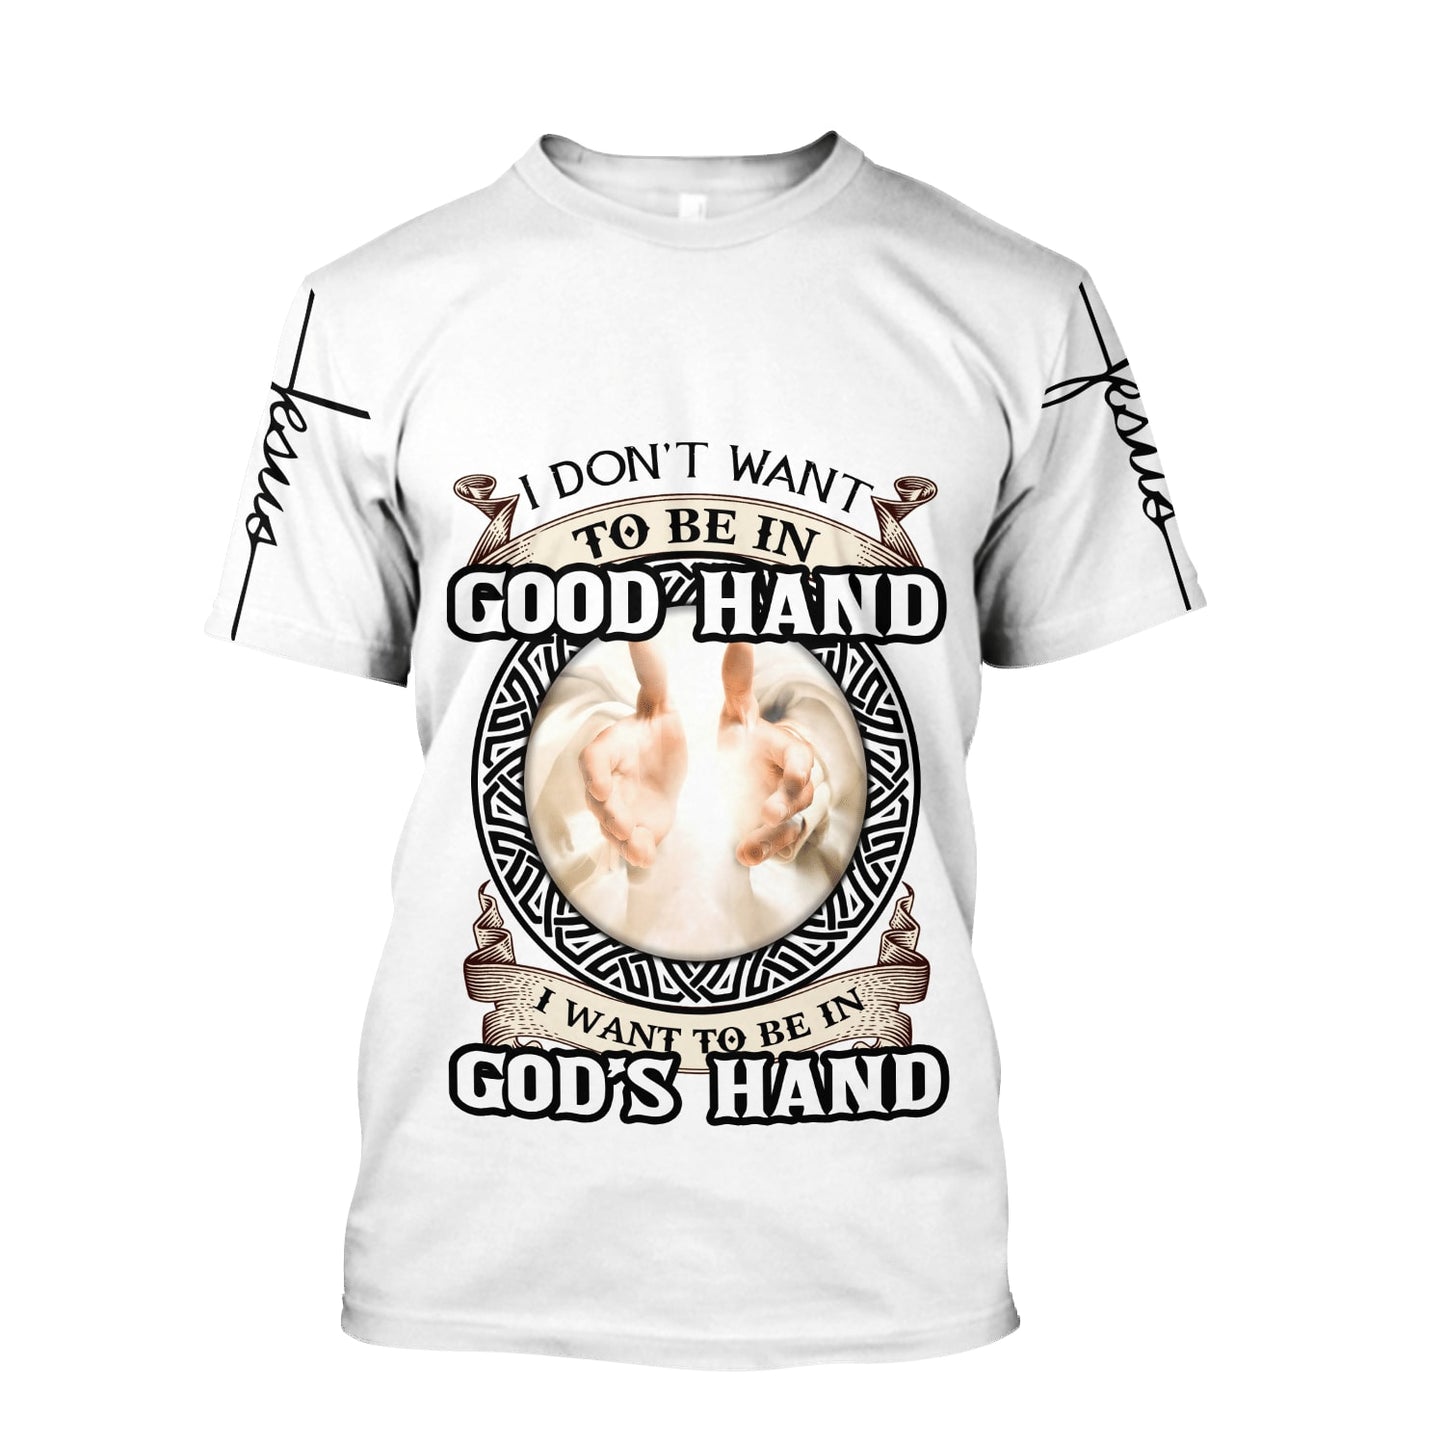 Easter Day Christian Hand Of God Jesus Customized Shirt Am Style - Christian 3d Shirts For Men Women